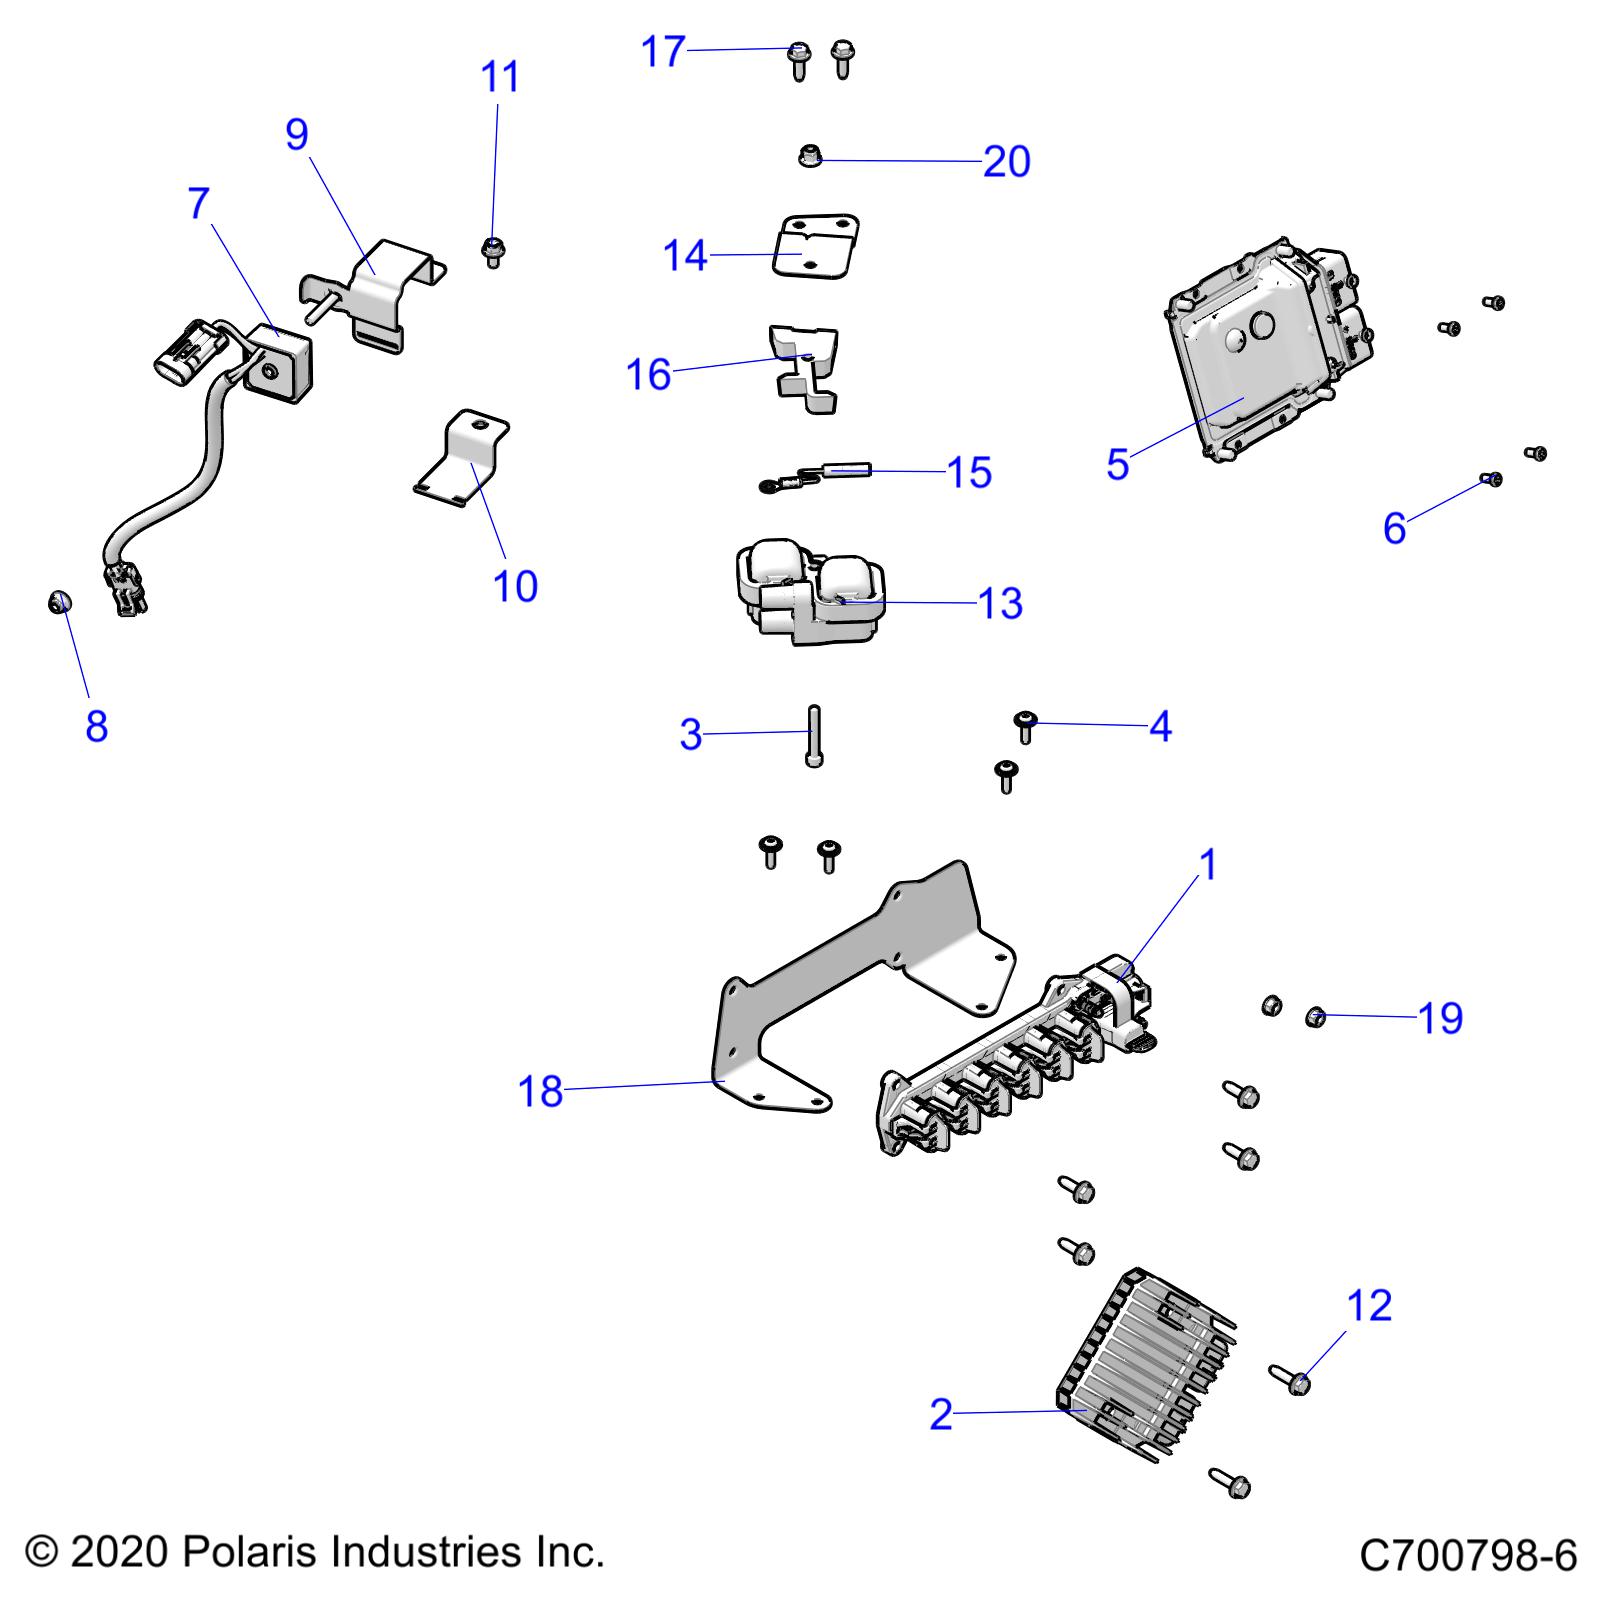 ELECTRICAL, COMPONENTS AND OPTIONS - G21GXH99AL/BL (C700798-6)